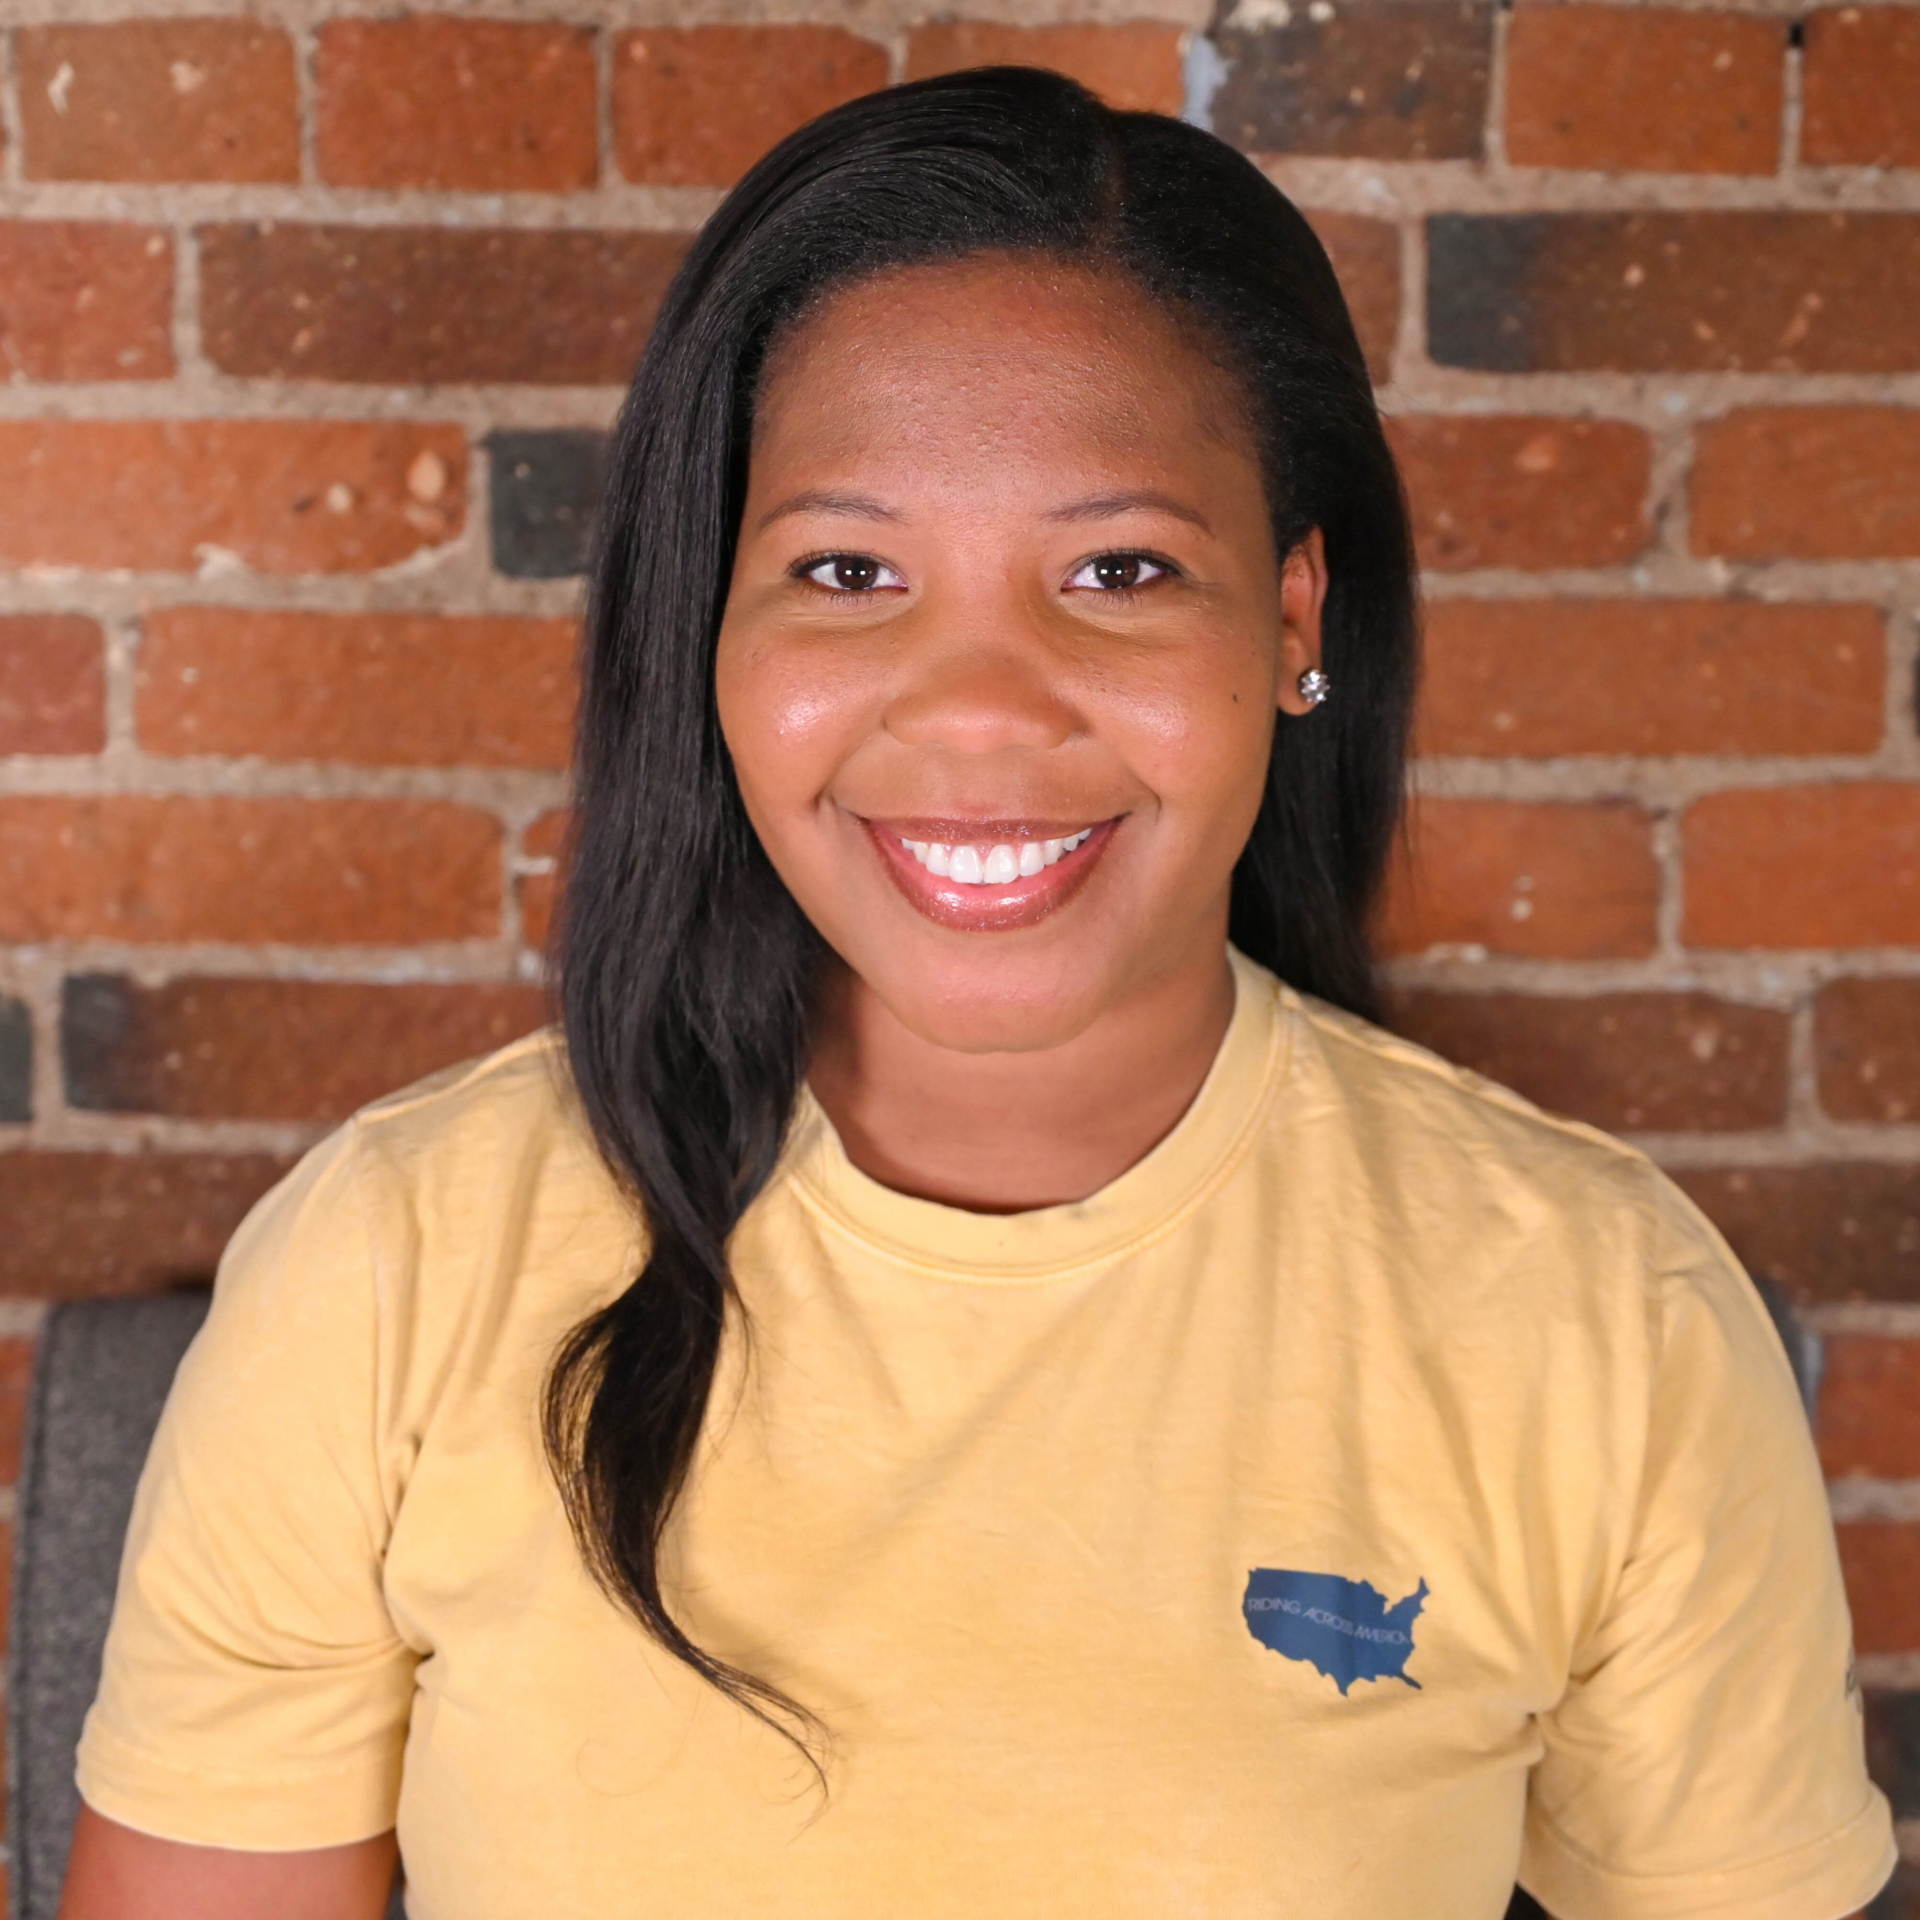 A Black woman wearing a yellow shirt photographed from the chest up.